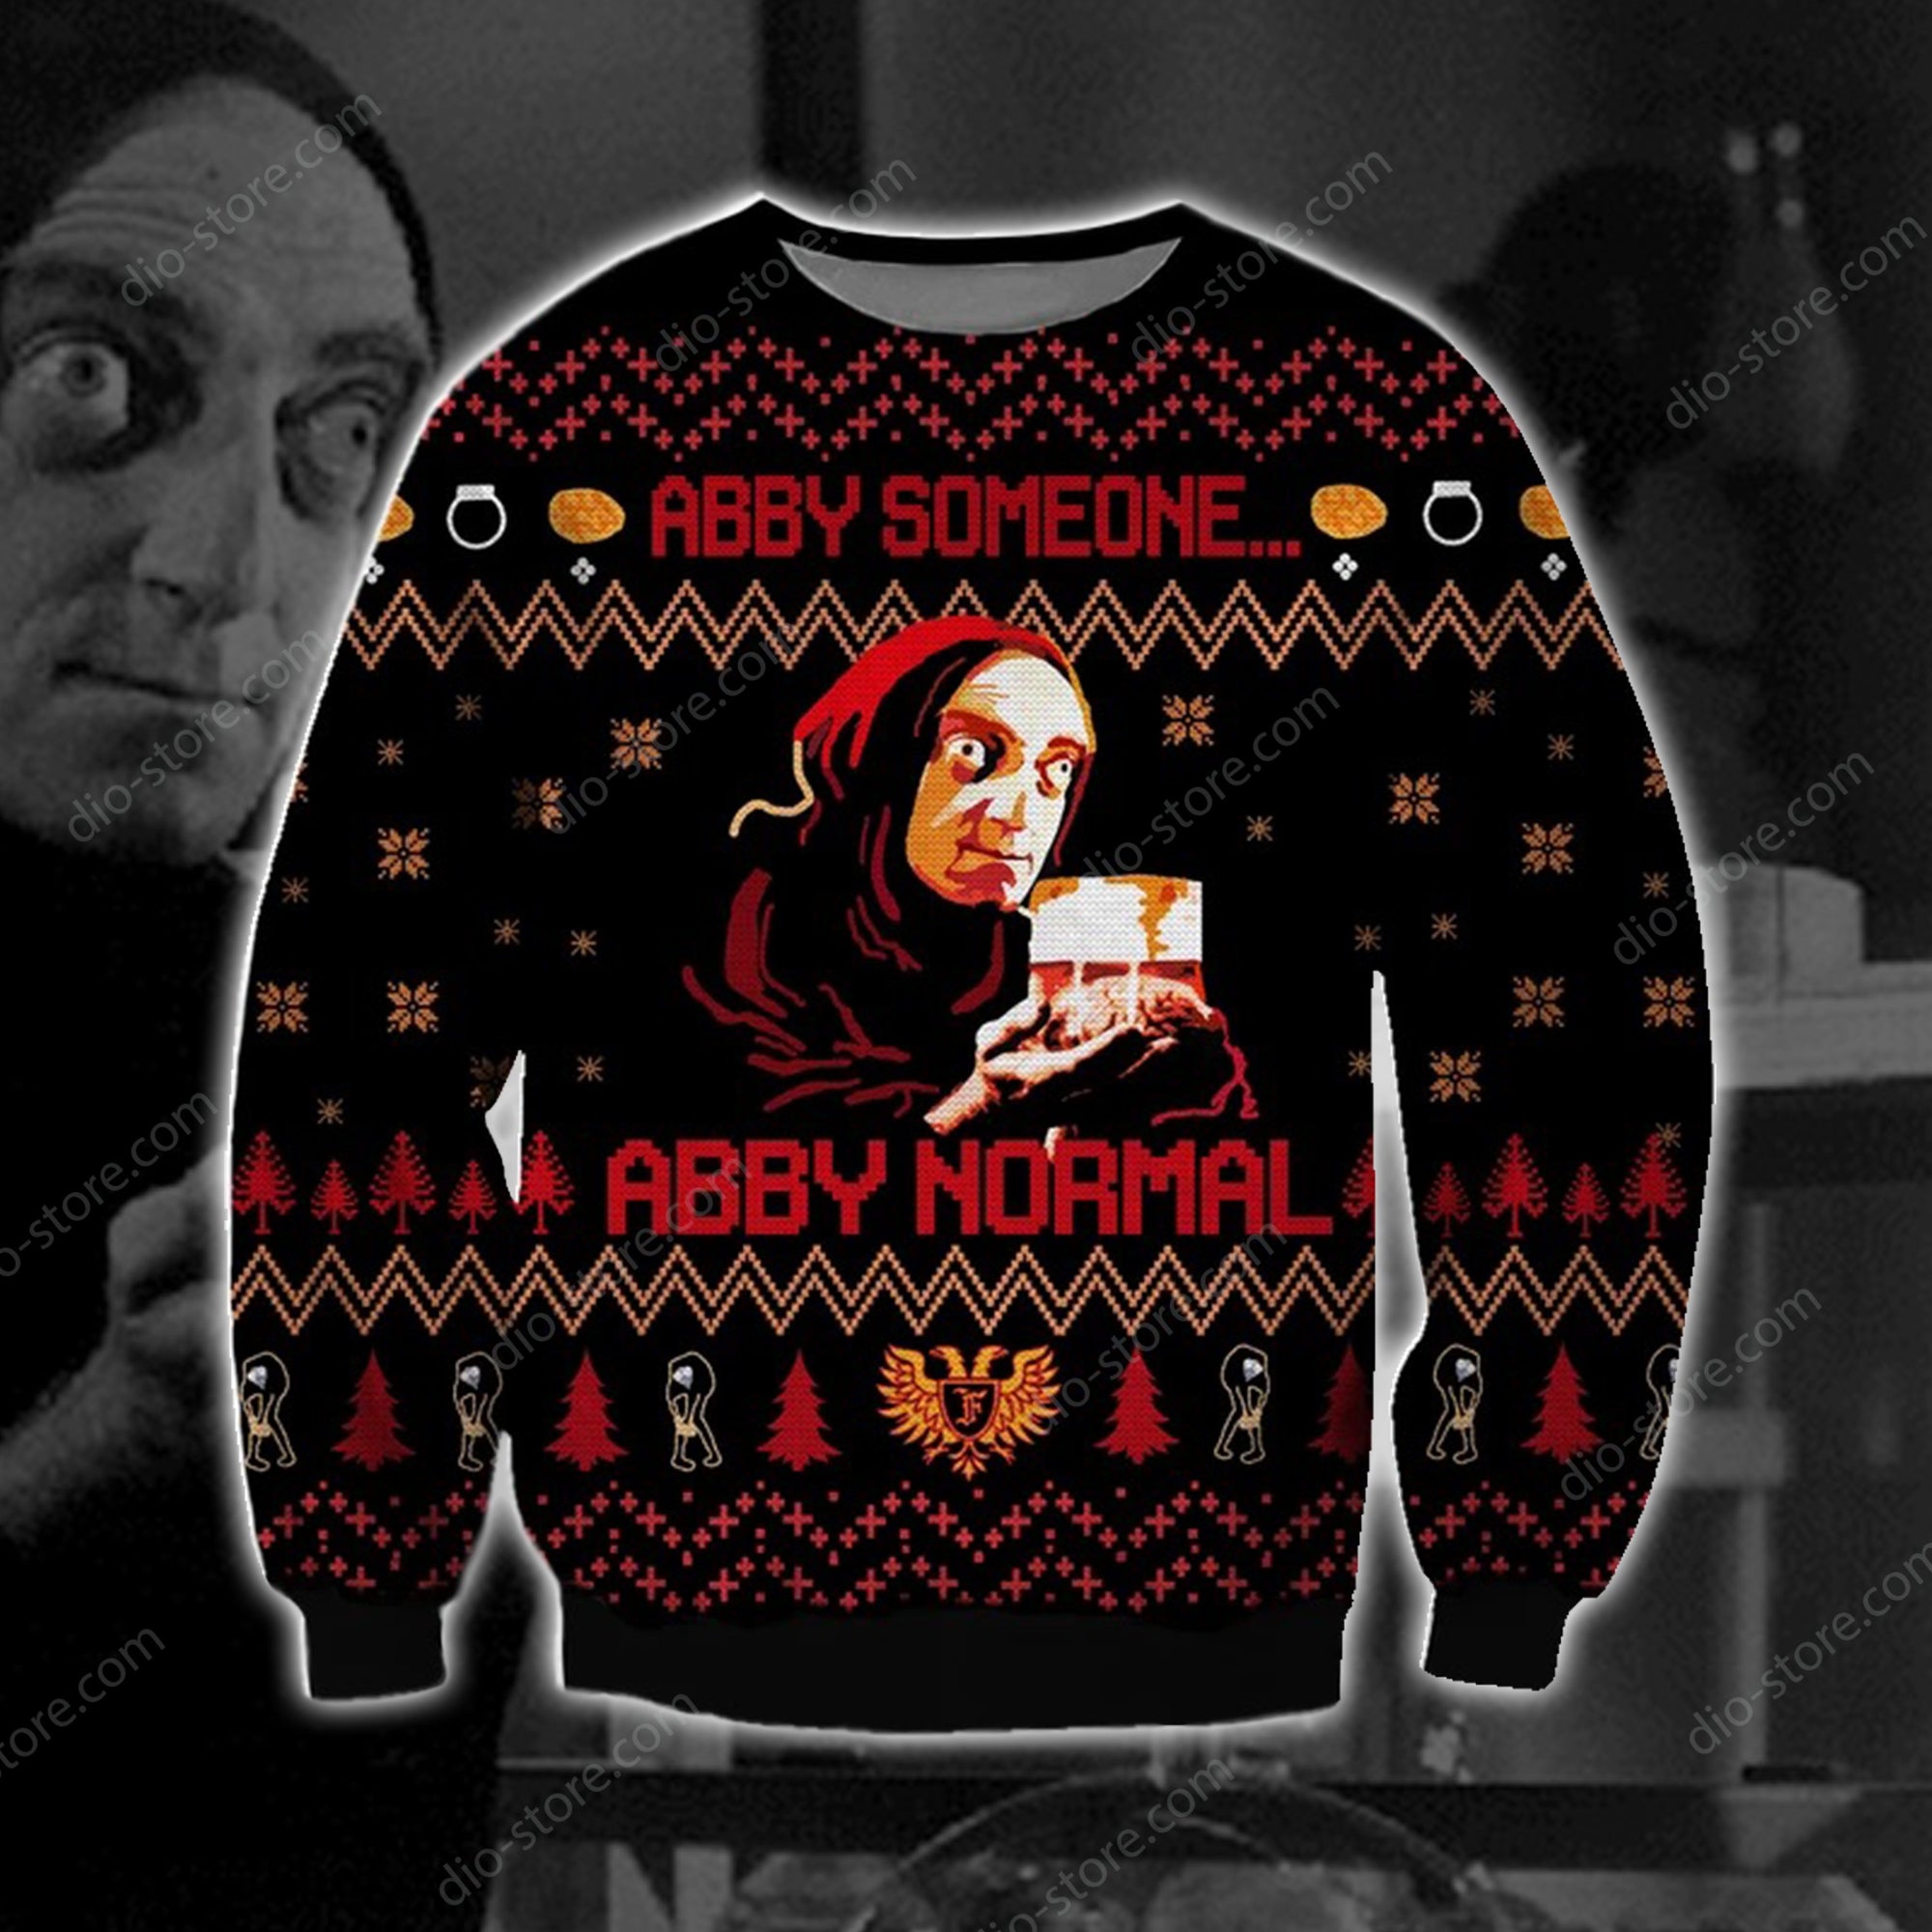 Abby Normal Knitting Pattern 3D Print Ugly Sweatshirt Hoodie All Over Printed Cint10670